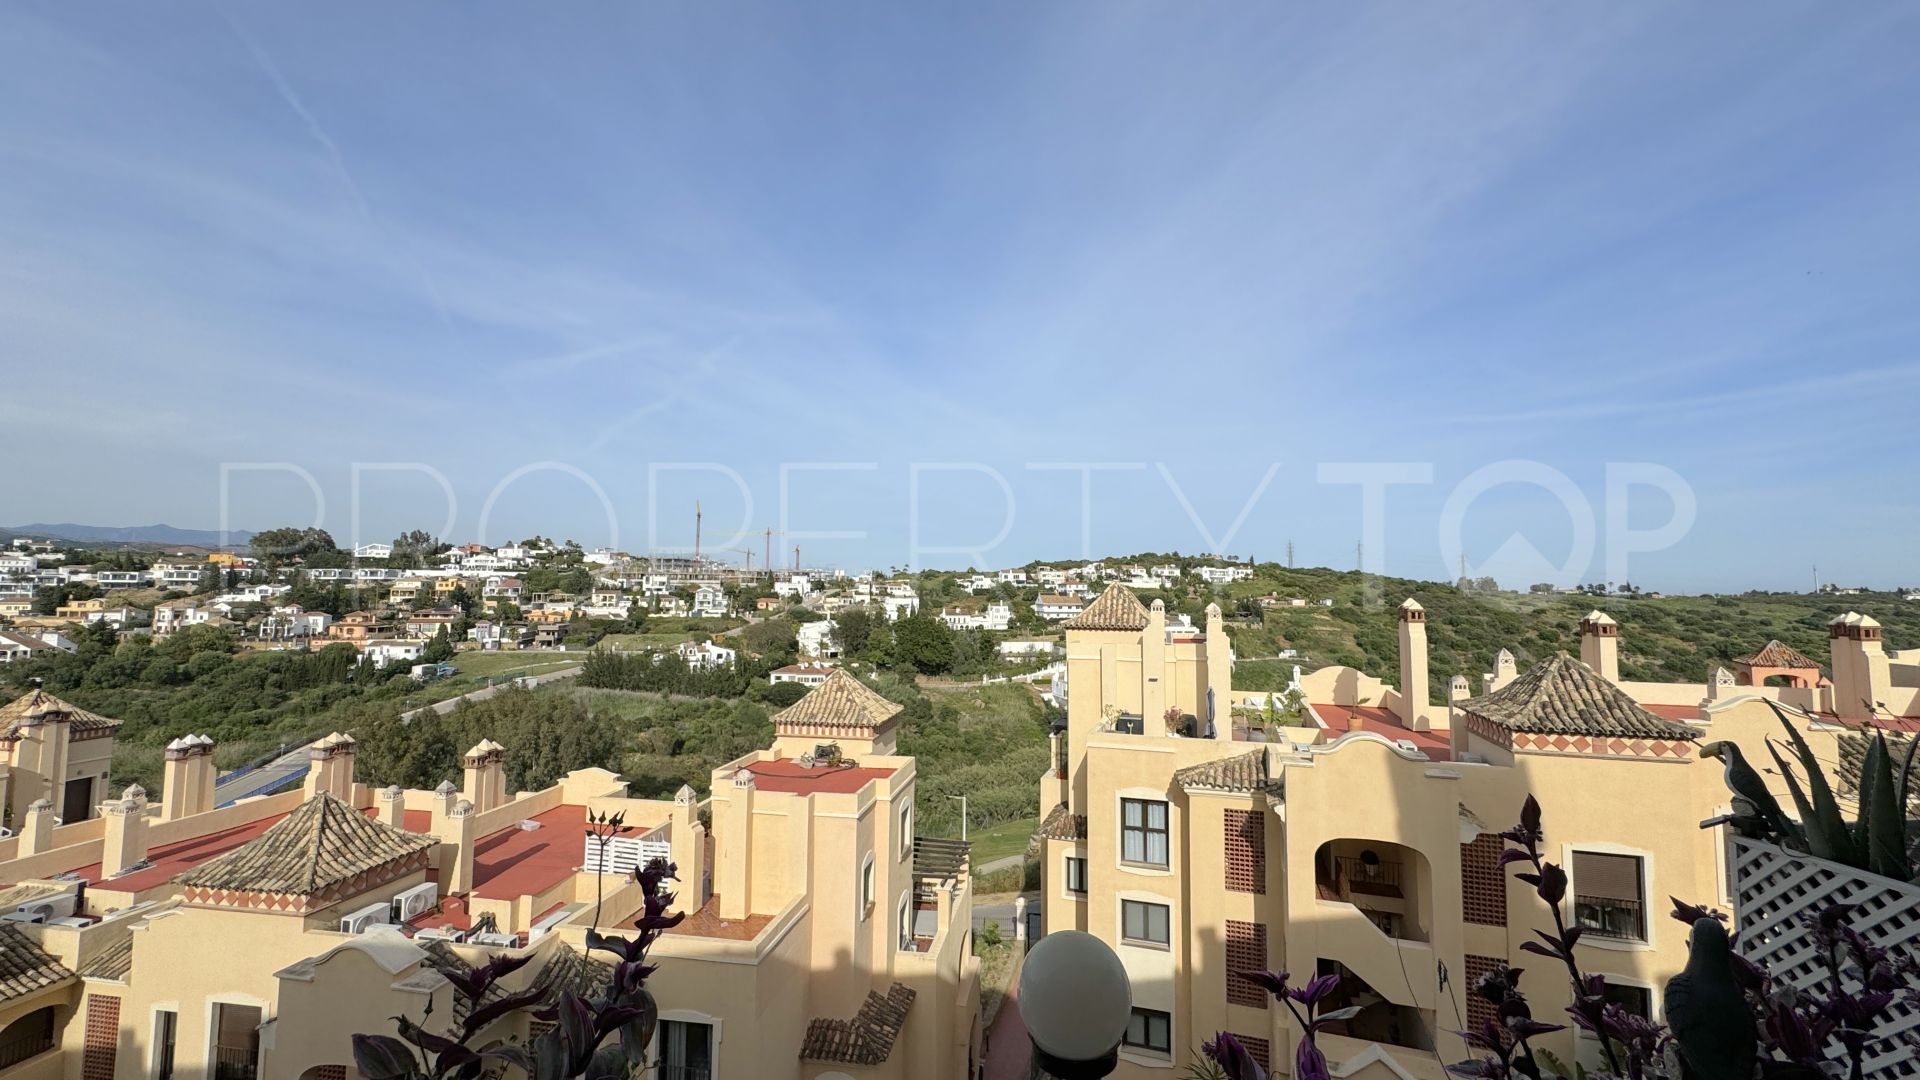 For sale apartment in Doña Lucia Resort